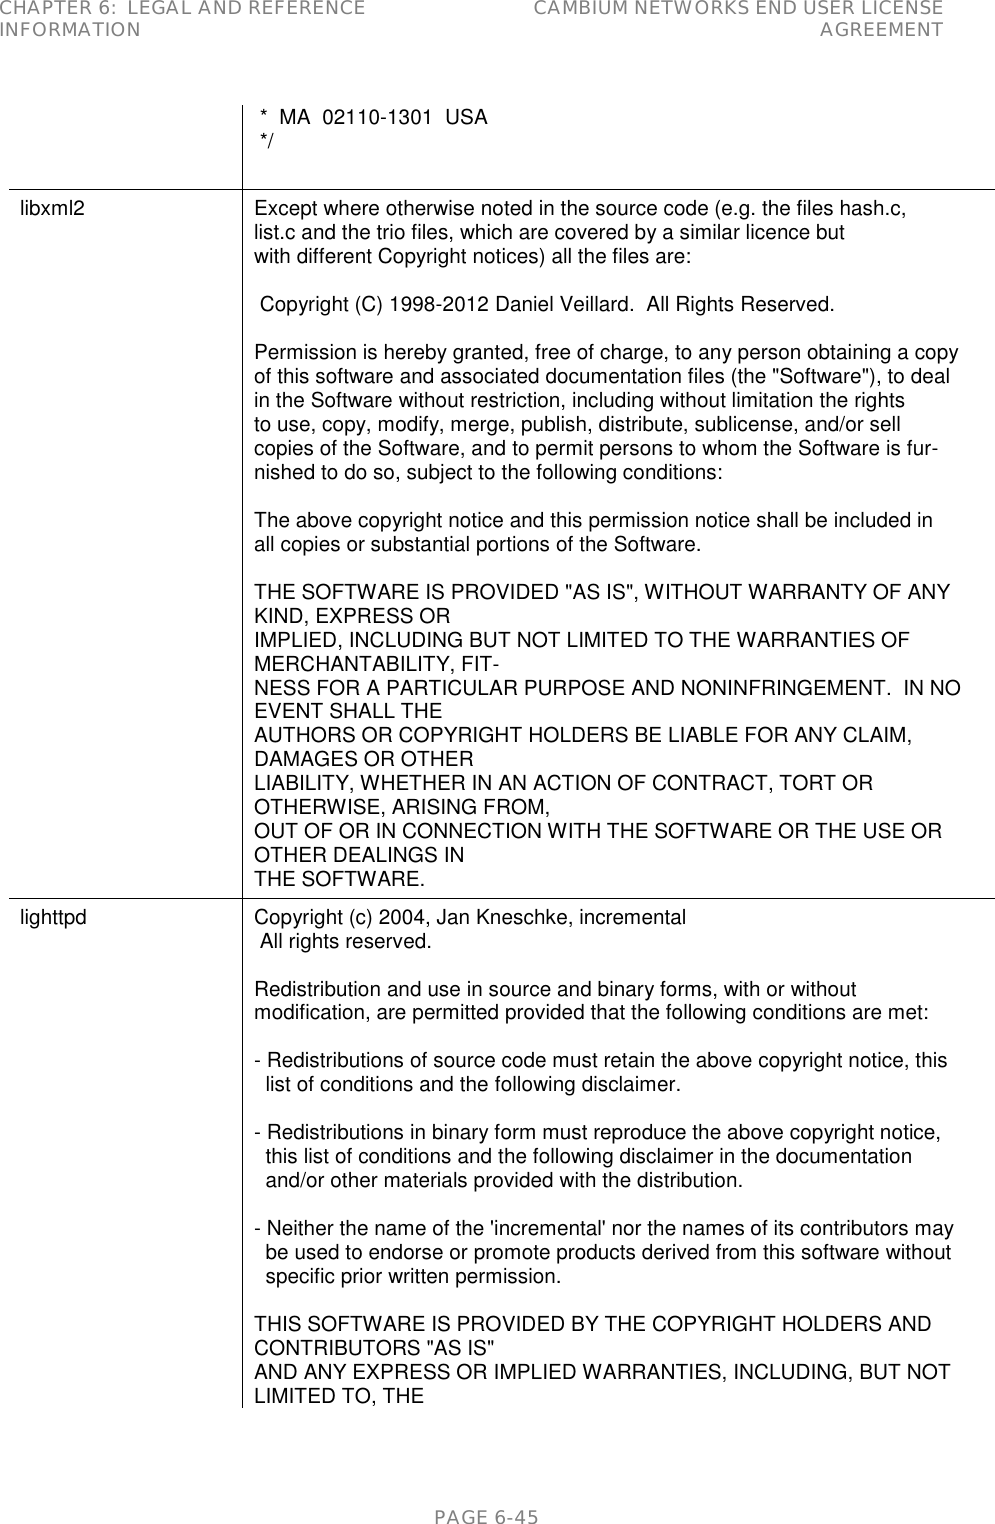 CHAPTER 6:  LEGAL AND REFERENCE INFORMATION CAMBIUM NETWORKS END USER LICENSE AGREEMENT   PAGE 6-45  *  MA  02110-1301  USA  */ libxml2 Except where otherwise noted in the source code (e.g. the files hash.c, list.c and the trio files, which are covered by a similar licence but with different Copyright notices) all the files are:   Copyright (C) 1998-2012 Daniel Veillard.  All Rights Reserved.  Permission is hereby granted, free of charge, to any person obtaining a copy of this software and associated documentation files (the &quot;Software&quot;), to deal in the Software without restriction, including without limitation the rights to use, copy, modify, merge, publish, distribute, sublicense, and/or sell copies of the Software, and to permit persons to whom the Software is fur- nished to do so, subject to the following conditions:  The above copyright notice and this permission notice shall be included in all copies or substantial portions of the Software.  THE SOFTWARE IS PROVIDED &quot;AS IS&quot;, WITHOUT WARRANTY OF ANY KIND, EXPRESS OR IMPLIED, INCLUDING BUT NOT LIMITED TO THE WARRANTIES OF MERCHANTABILITY, FIT- NESS FOR A PARTICULAR PURPOSE AND NONINFRINGEMENT.  IN NO EVENT SHALL THE AUTHORS OR COPYRIGHT HOLDERS BE LIABLE FOR ANY CLAIM, DAMAGES OR OTHER LIABILITY, WHETHER IN AN ACTION OF CONTRACT, TORT OR OTHERWISE, ARISING FROM, OUT OF OR IN CONNECTION WITH THE SOFTWARE OR THE USE OR OTHER DEALINGS IN THE SOFTWARE. lighttpd Copyright (c) 2004, Jan Kneschke, incremental  All rights reserved.  Redistribution and use in source and binary forms, with or without modification, are permitted provided that the following conditions are met:  - Redistributions of source code must retain the above copyright notice, this   list of conditions and the following disclaimer.  - Redistributions in binary form must reproduce the above copyright notice,   this list of conditions and the following disclaimer in the documentation   and/or other materials provided with the distribution.  - Neither the name of the &apos;incremental&apos; nor the names of its contributors may   be used to endorse or promote products derived from this software without   specific prior written permission.  THIS SOFTWARE IS PROVIDED BY THE COPYRIGHT HOLDERS AND CONTRIBUTORS &quot;AS IS&quot; AND ANY EXPRESS OR IMPLIED WARRANTIES, INCLUDING, BUT NOT LIMITED TO, THE 